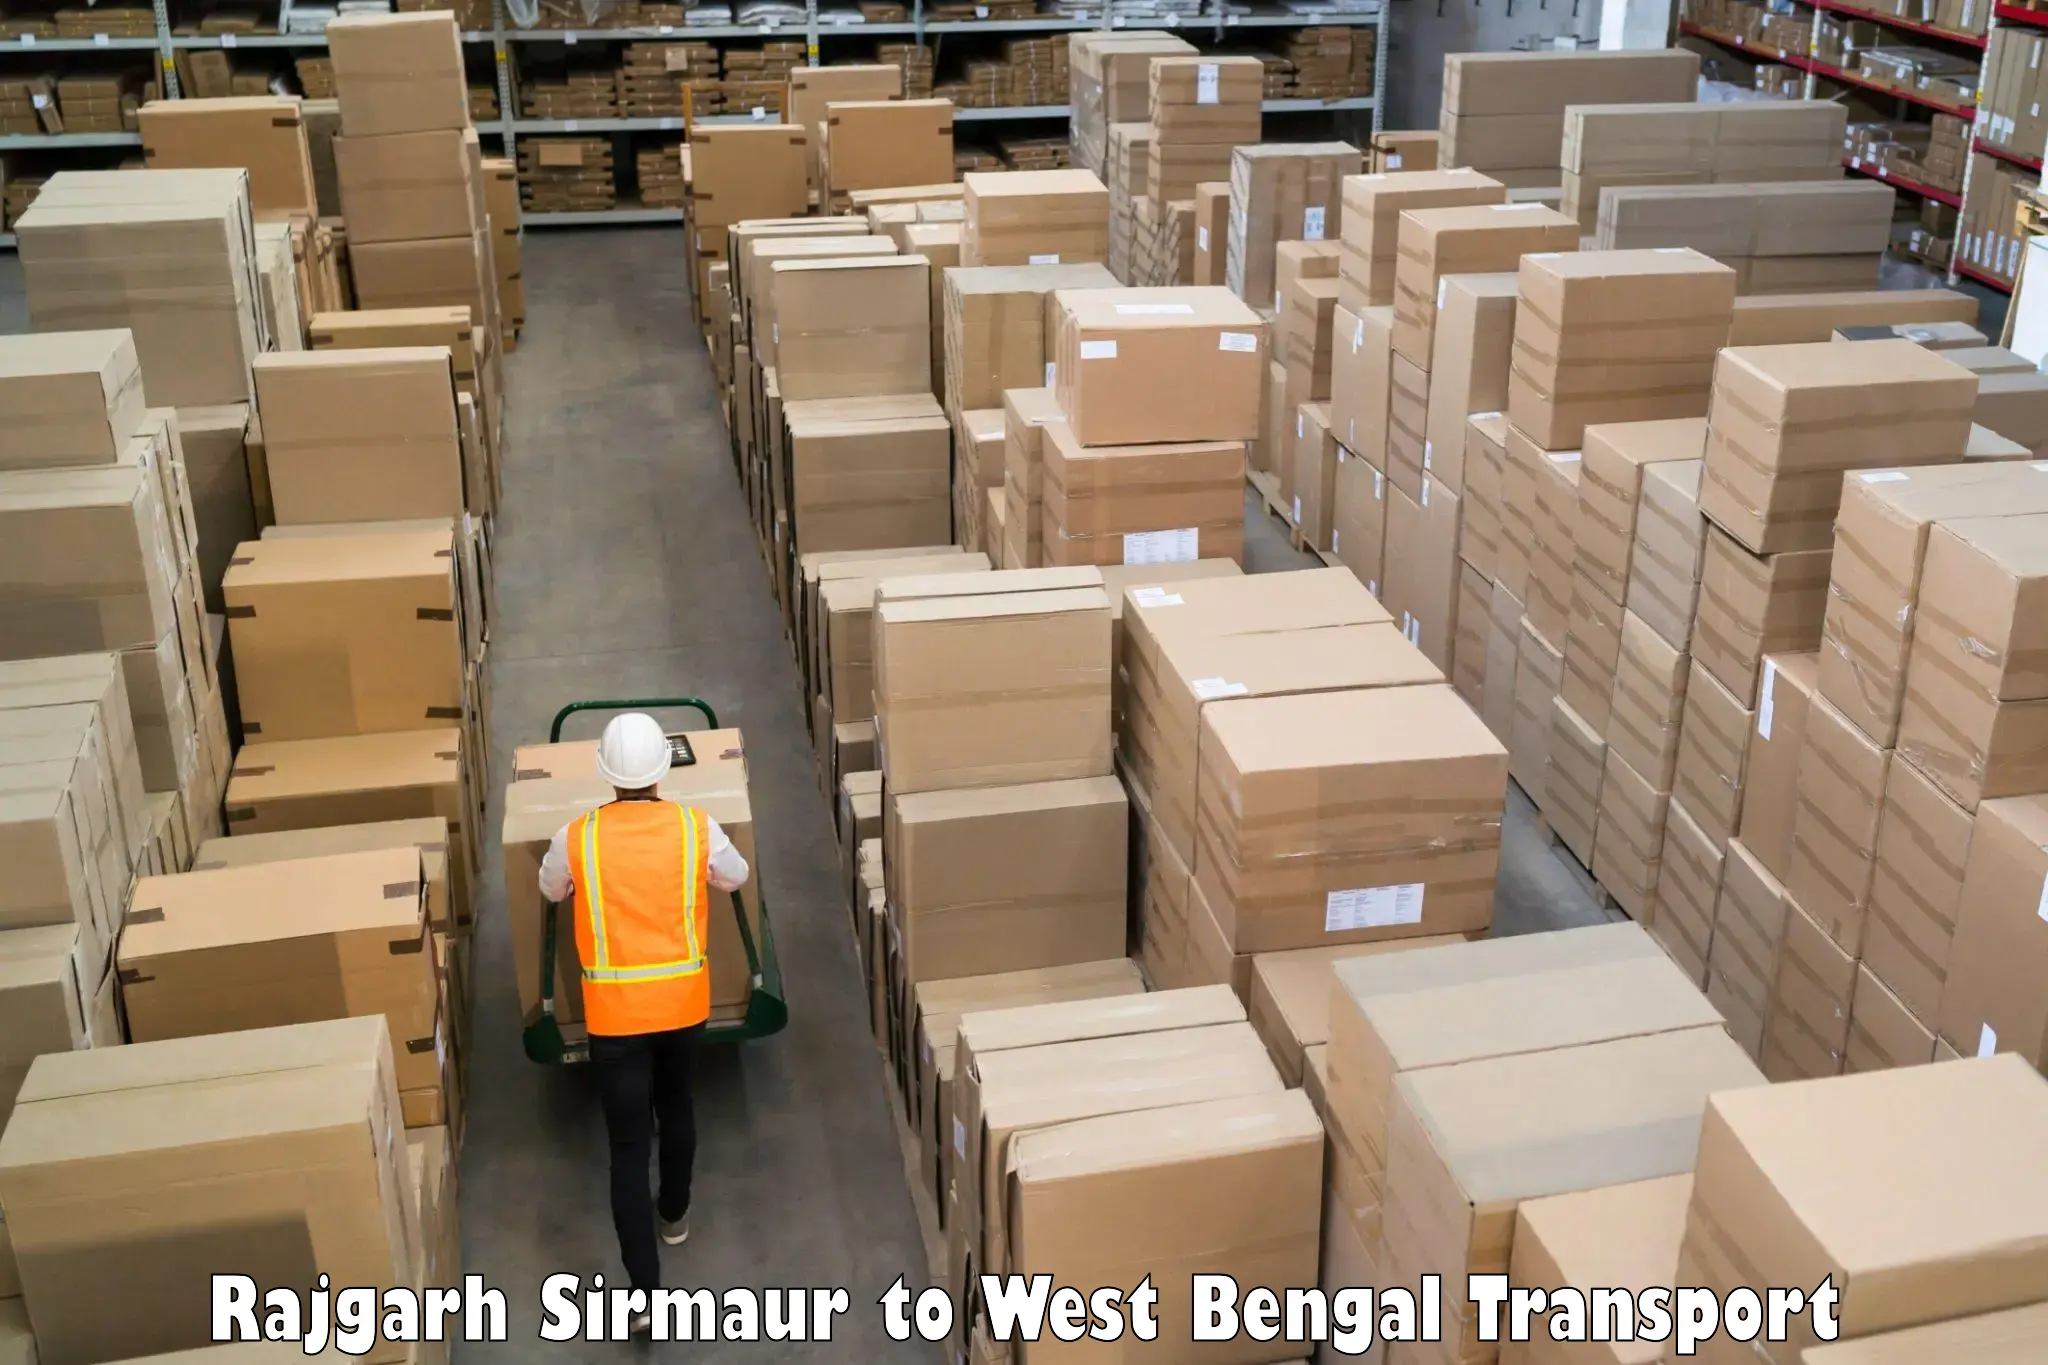 Land transport services in Rajgarh Sirmaur to Barrackpore